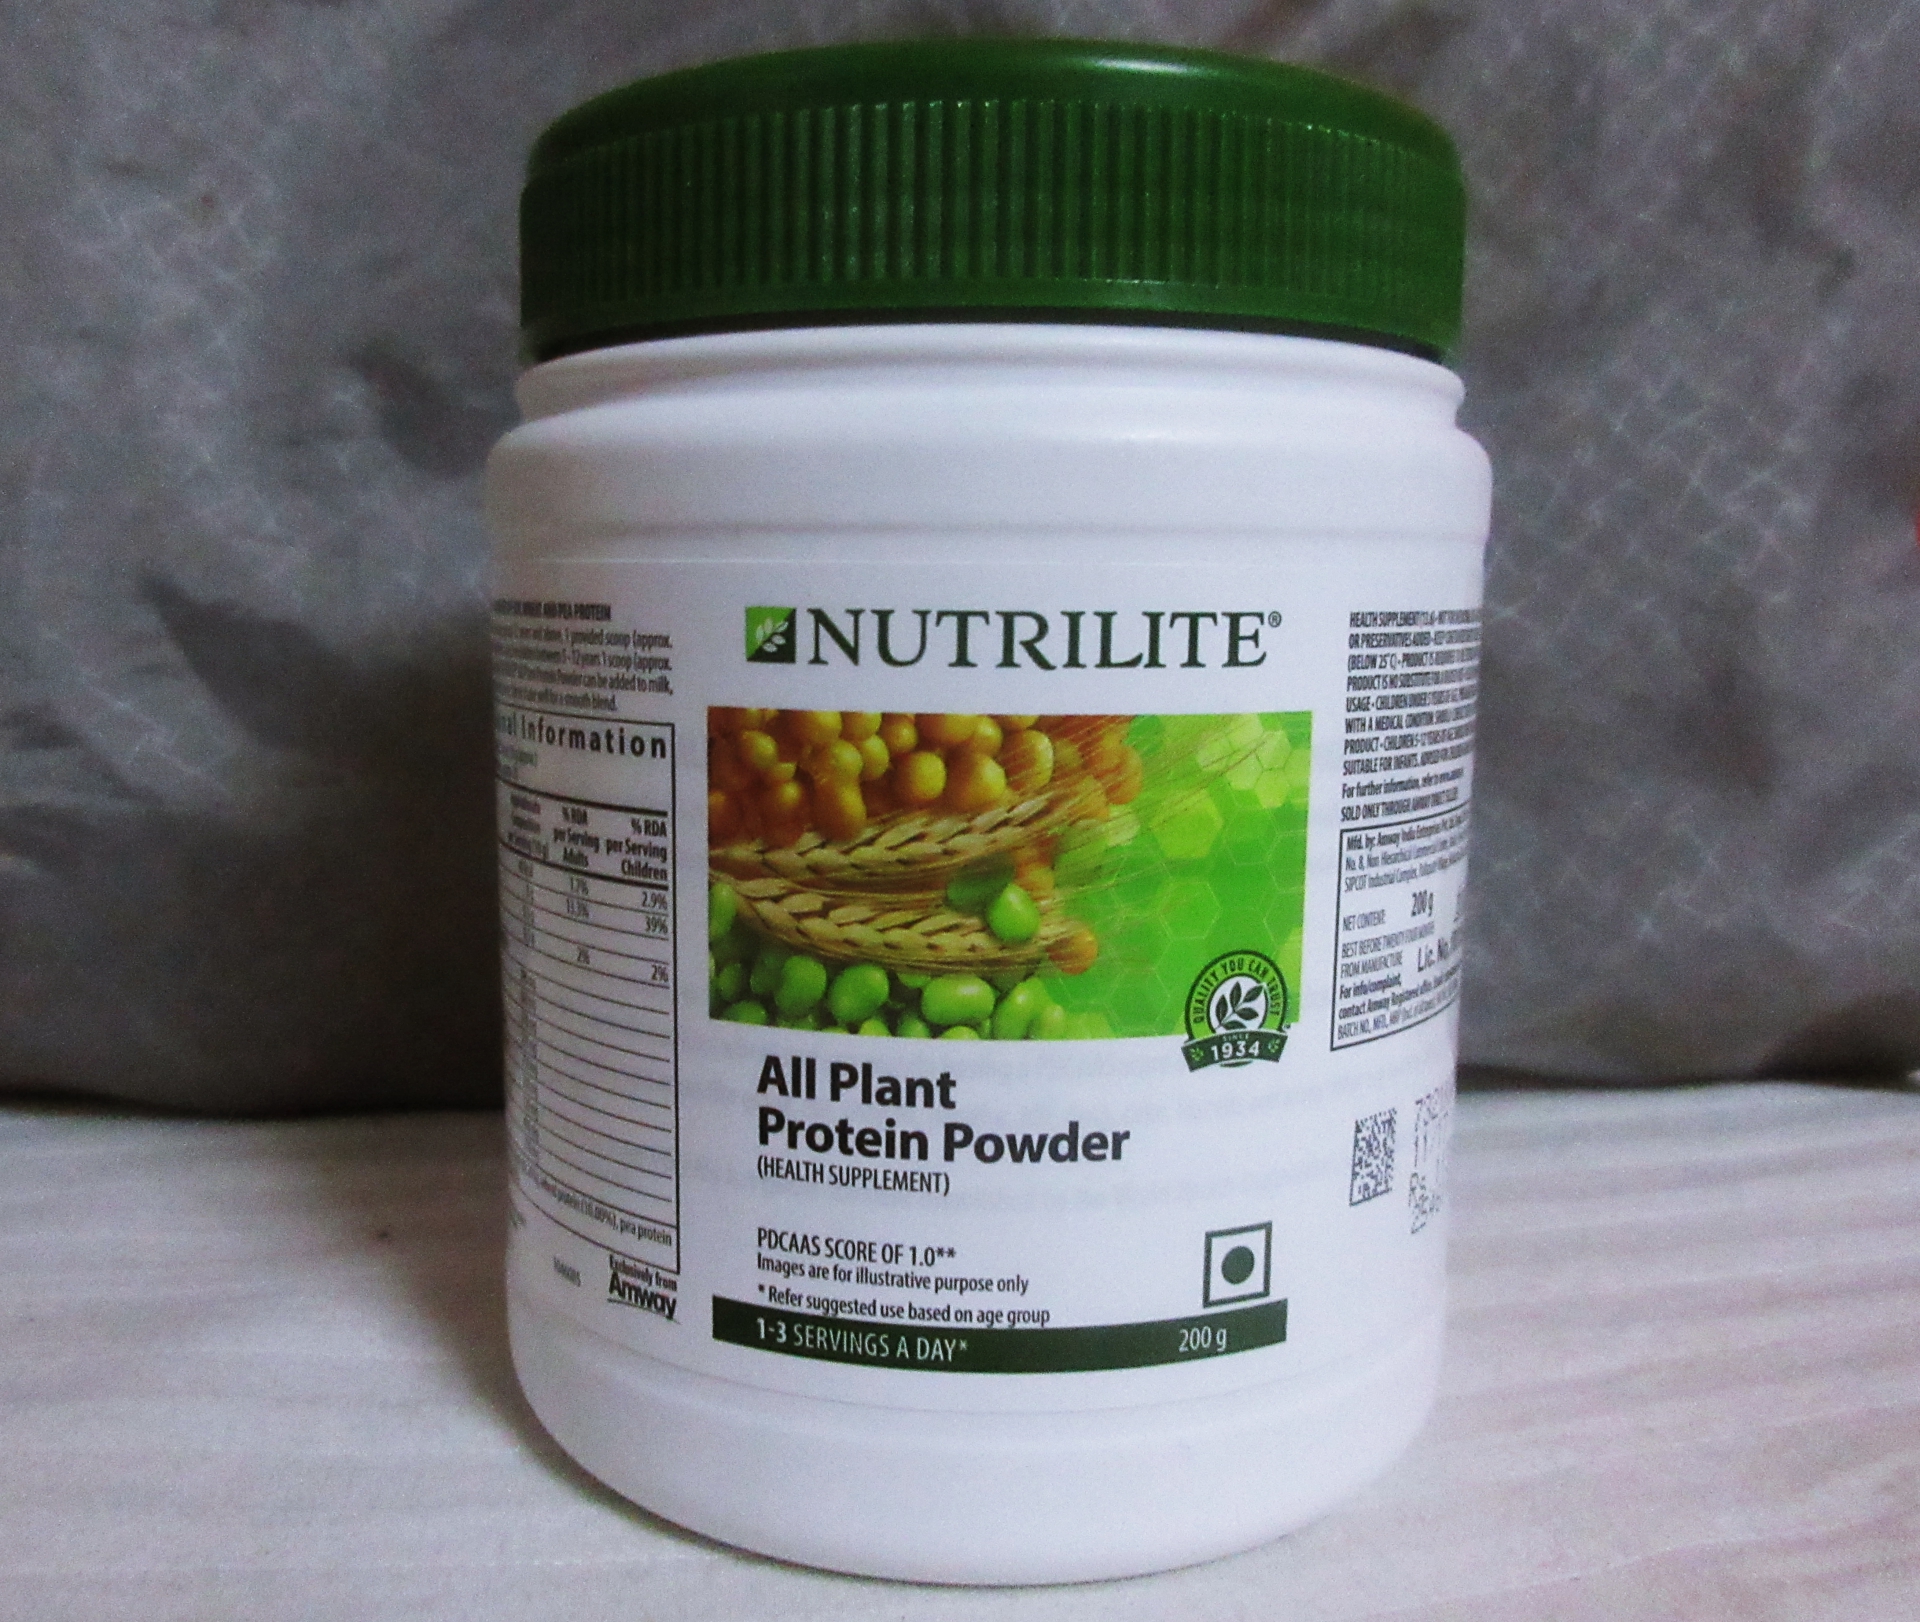 Try Nutrilite All Plant Protein Powder For a Wholesome Protein Boost